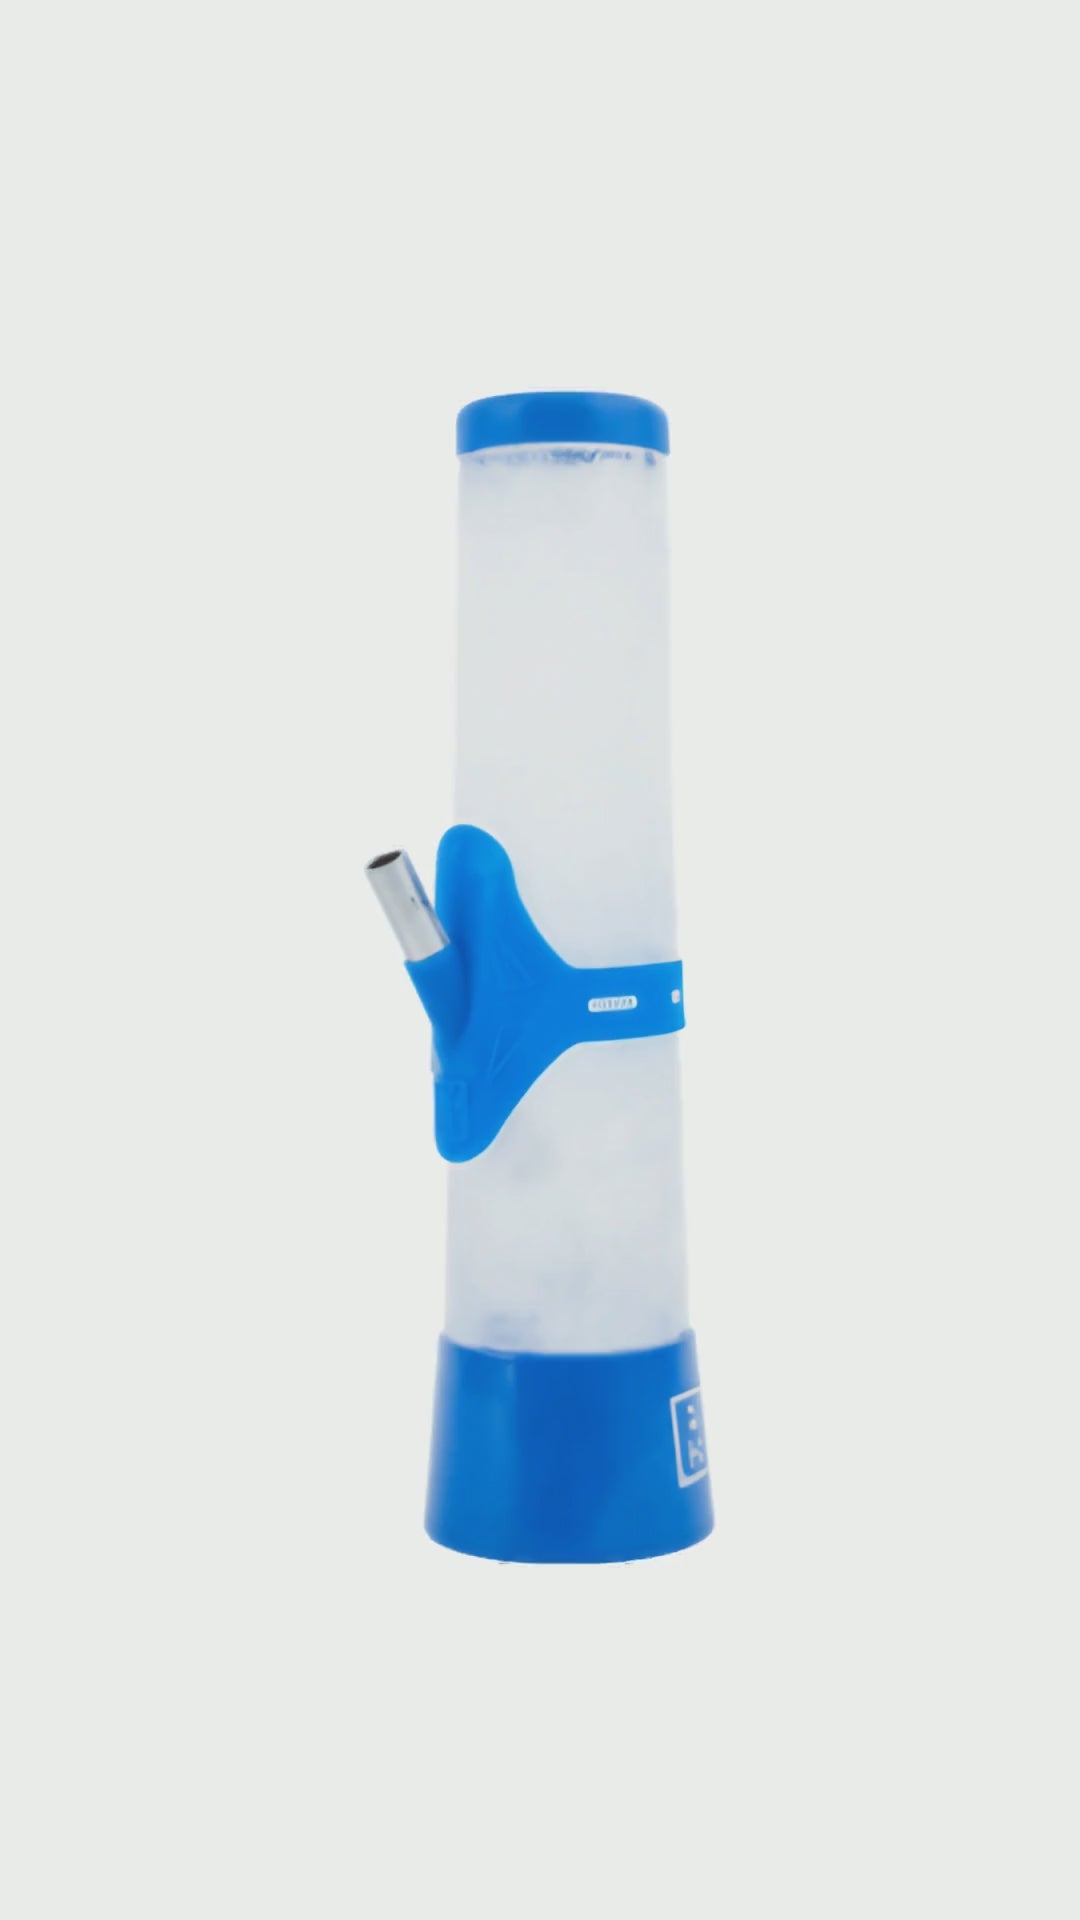 Bulk Order Gravitron Gravity Water Pipe With Glass Slide And